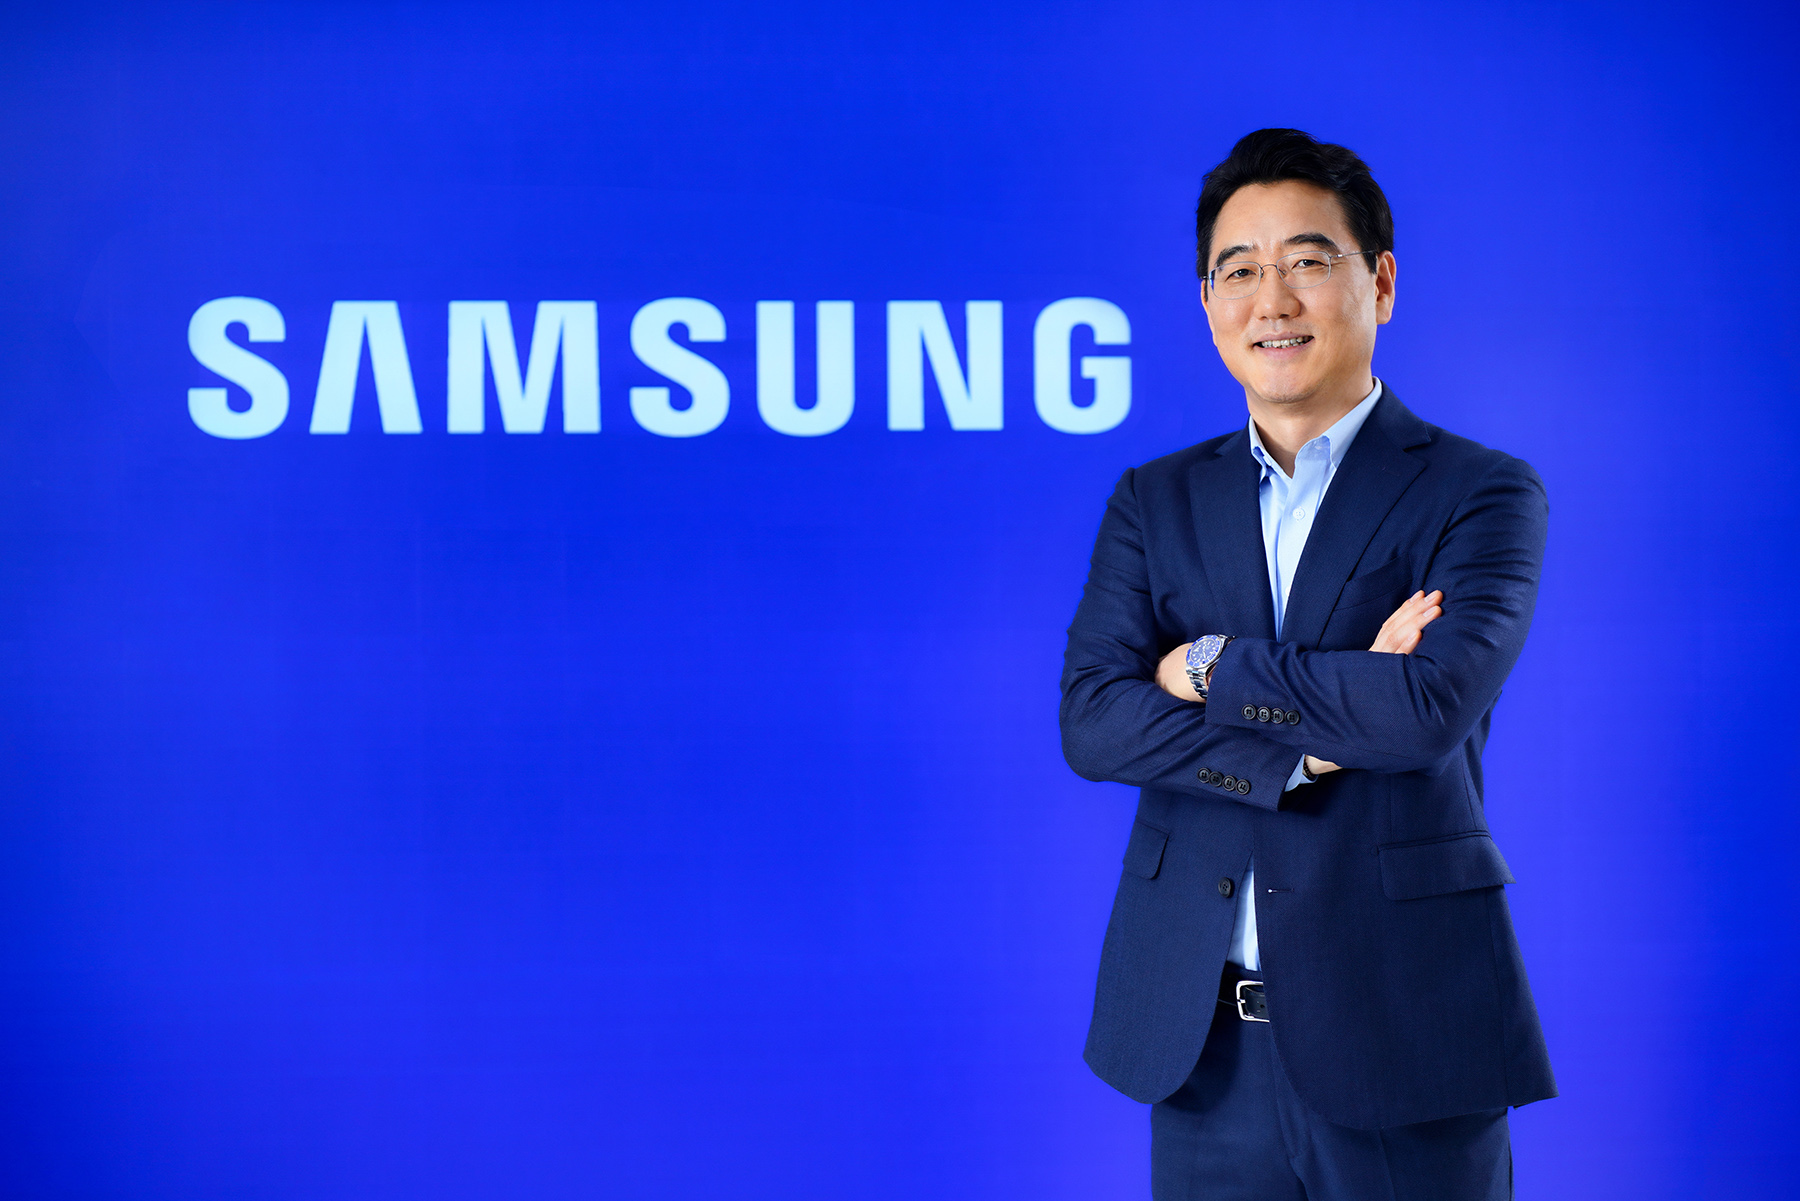 Mr. Harry lee, President of Samsung Electronics Co. Thailand